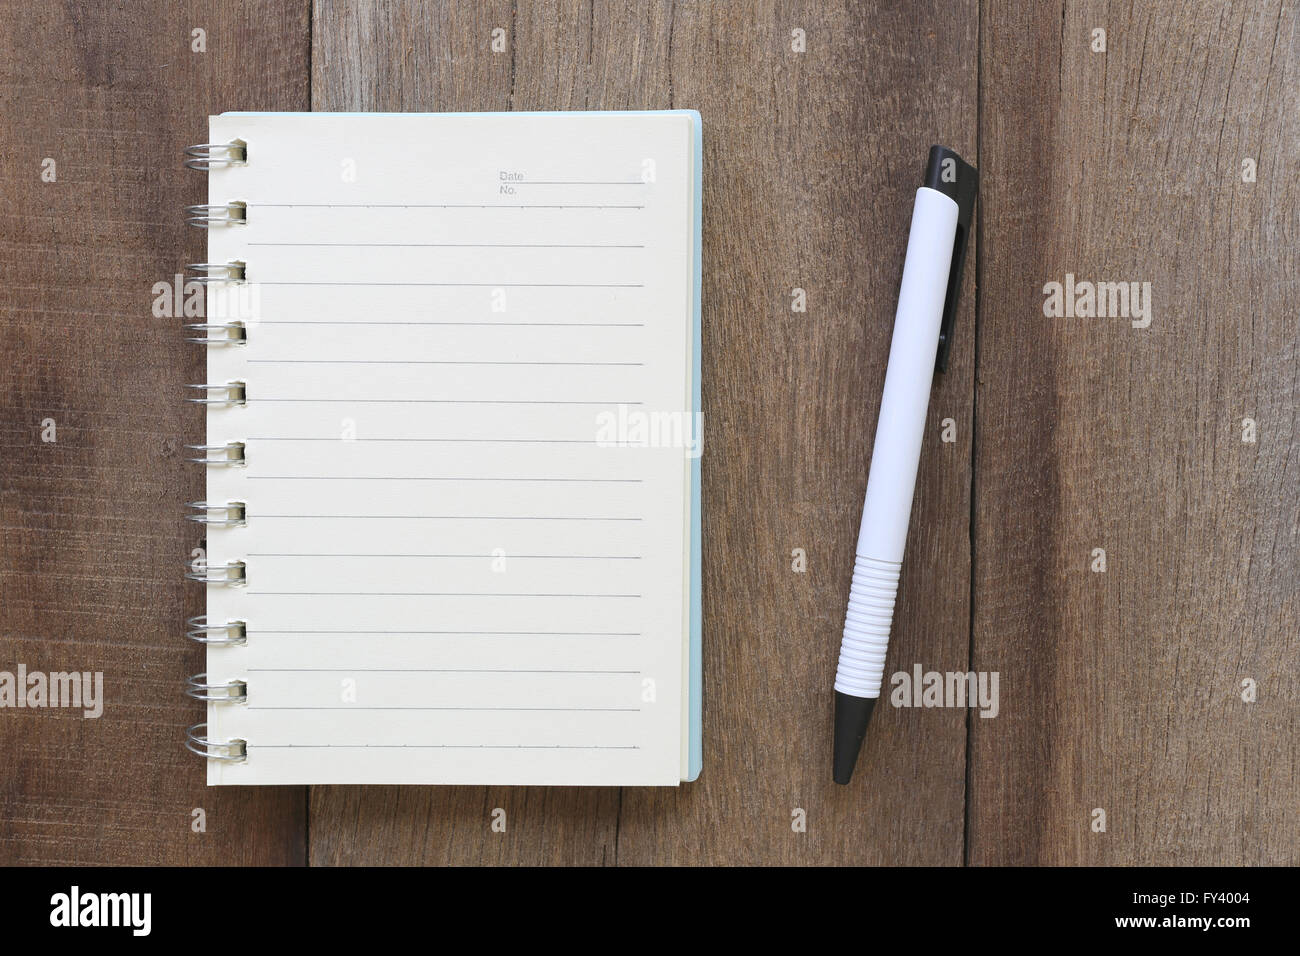 Notebook and pen on old wood for the design background,Blank paper to take notes or add text to it. Stock Photo